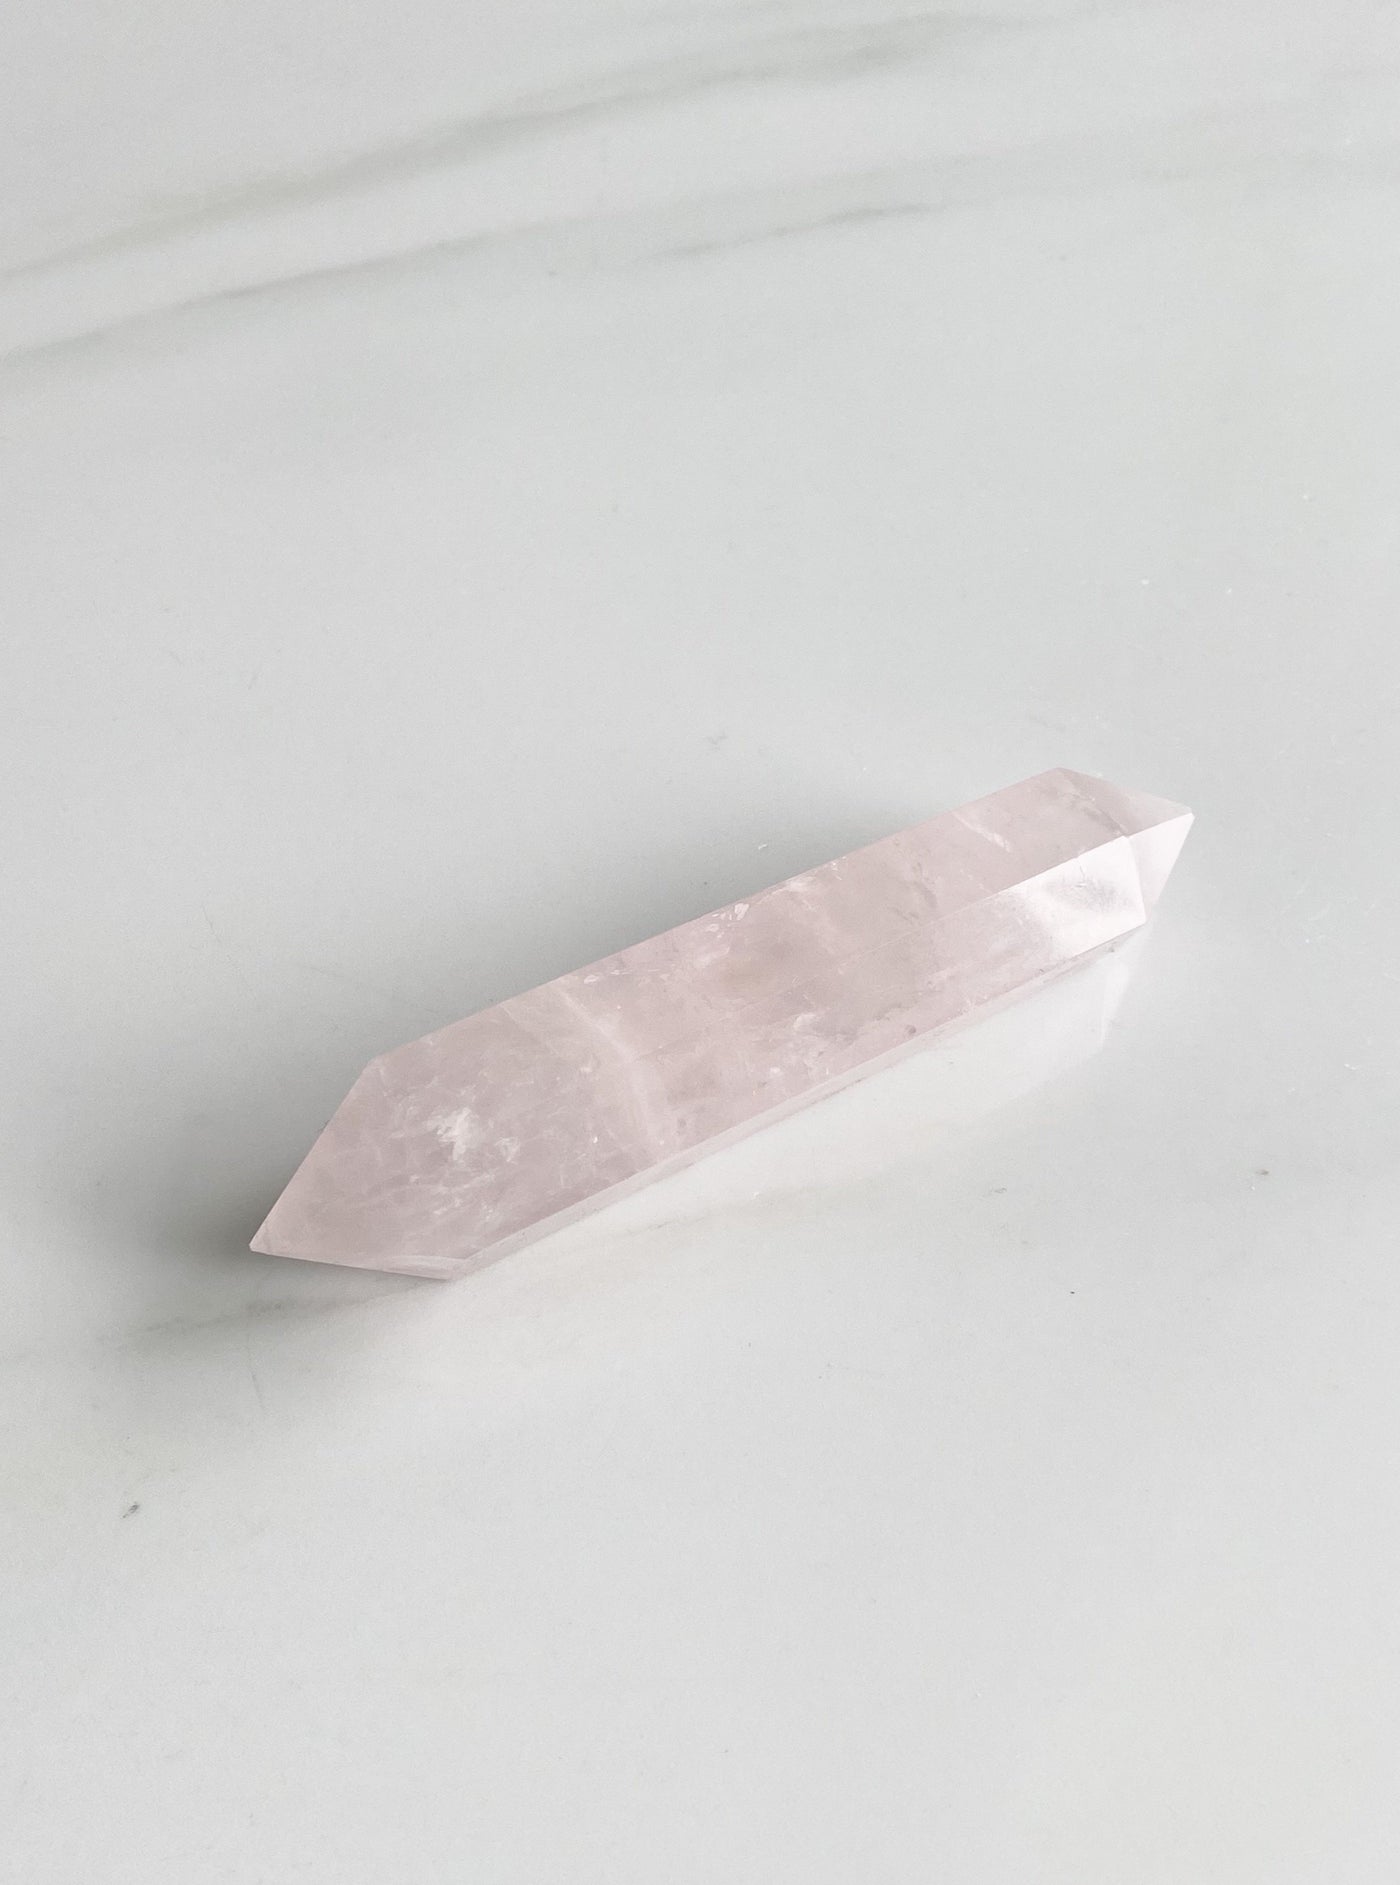 Amplify Love and Healing with Rose Quartz Double Terminator Wand